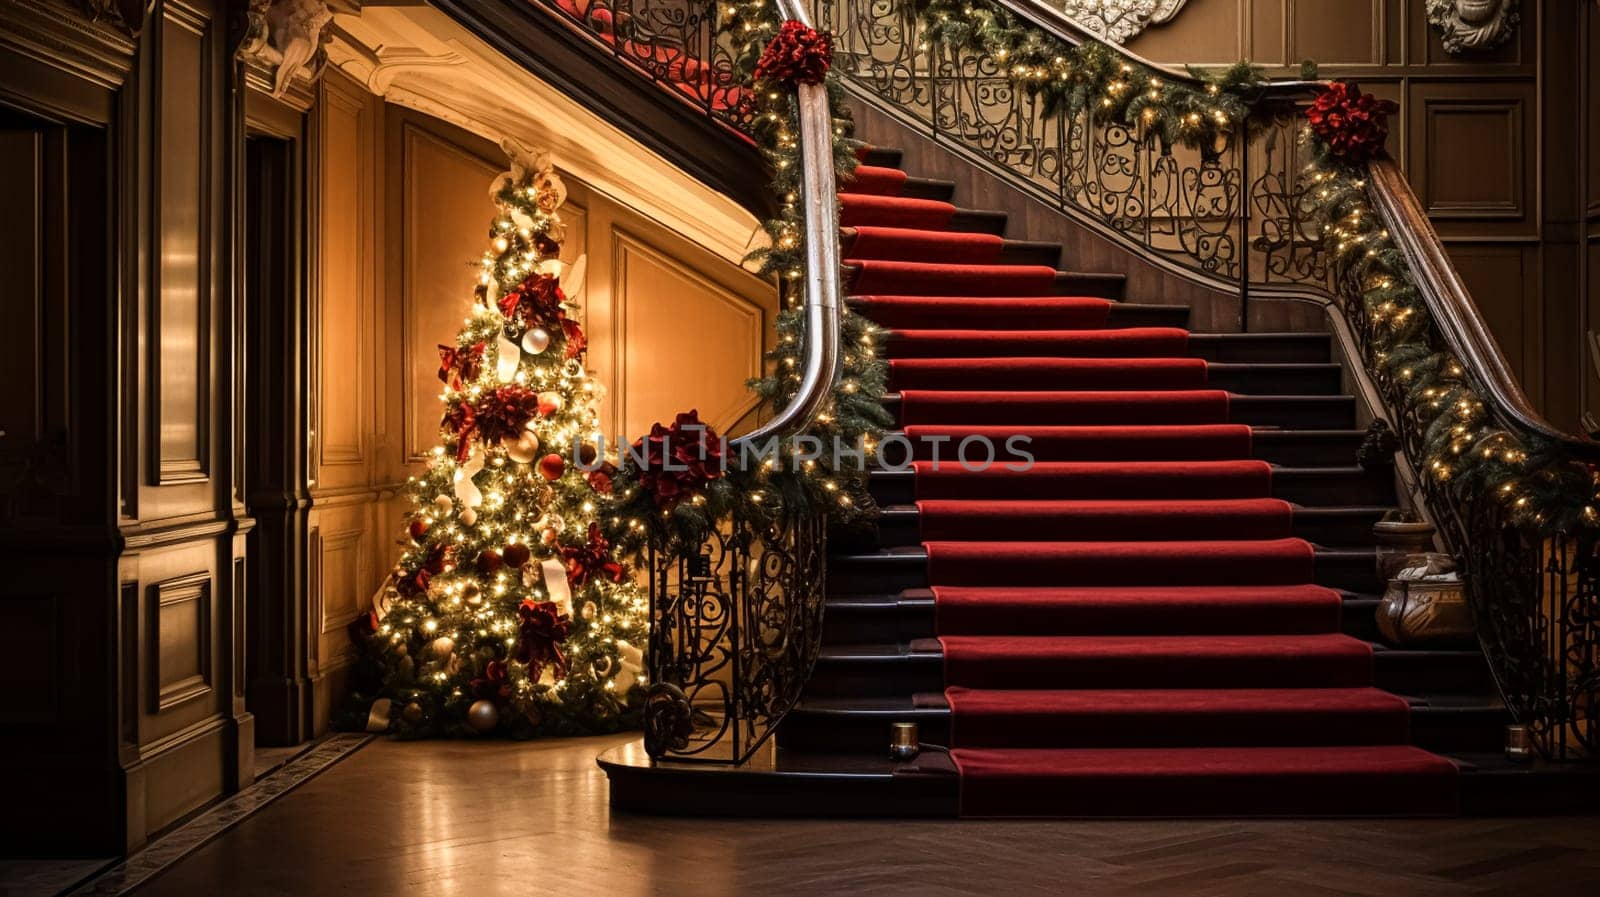 Christmas at the manor, grand entrance hall with staircase and Christmas tree, English countryside decoration and festive interior decor